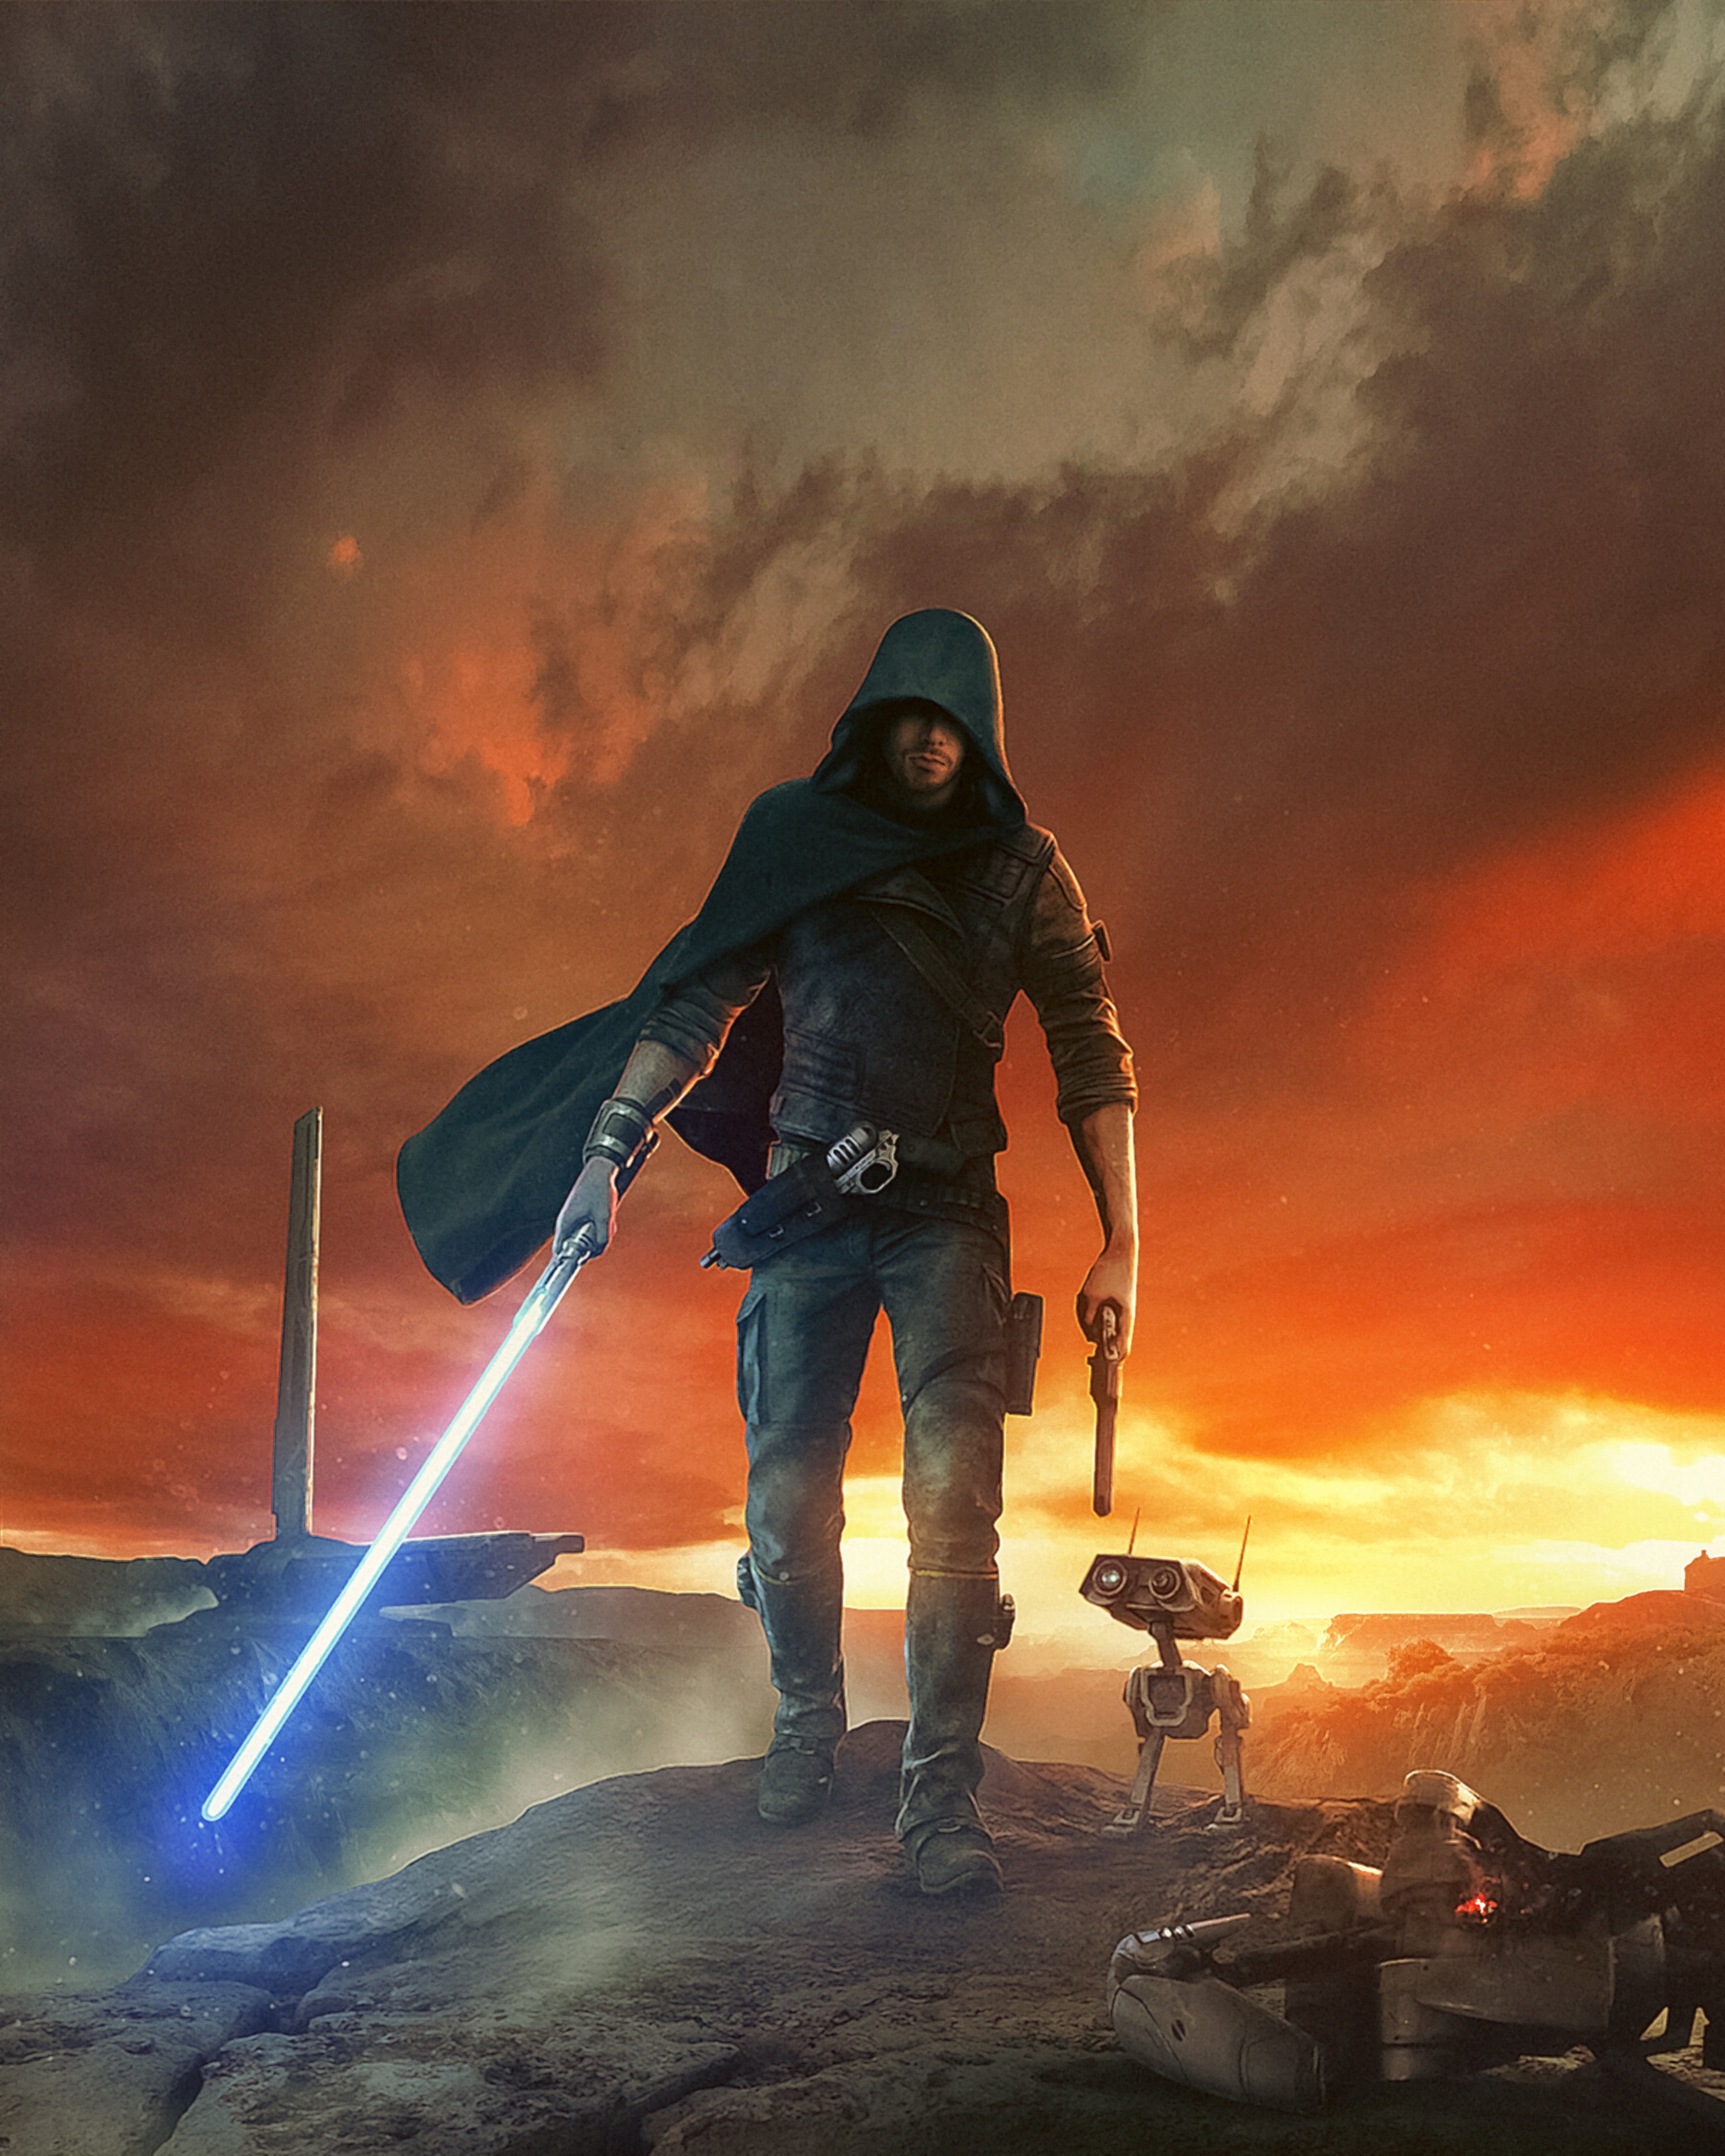 Download Jedi wallpapers for mobile phone free Jedi HD pictures